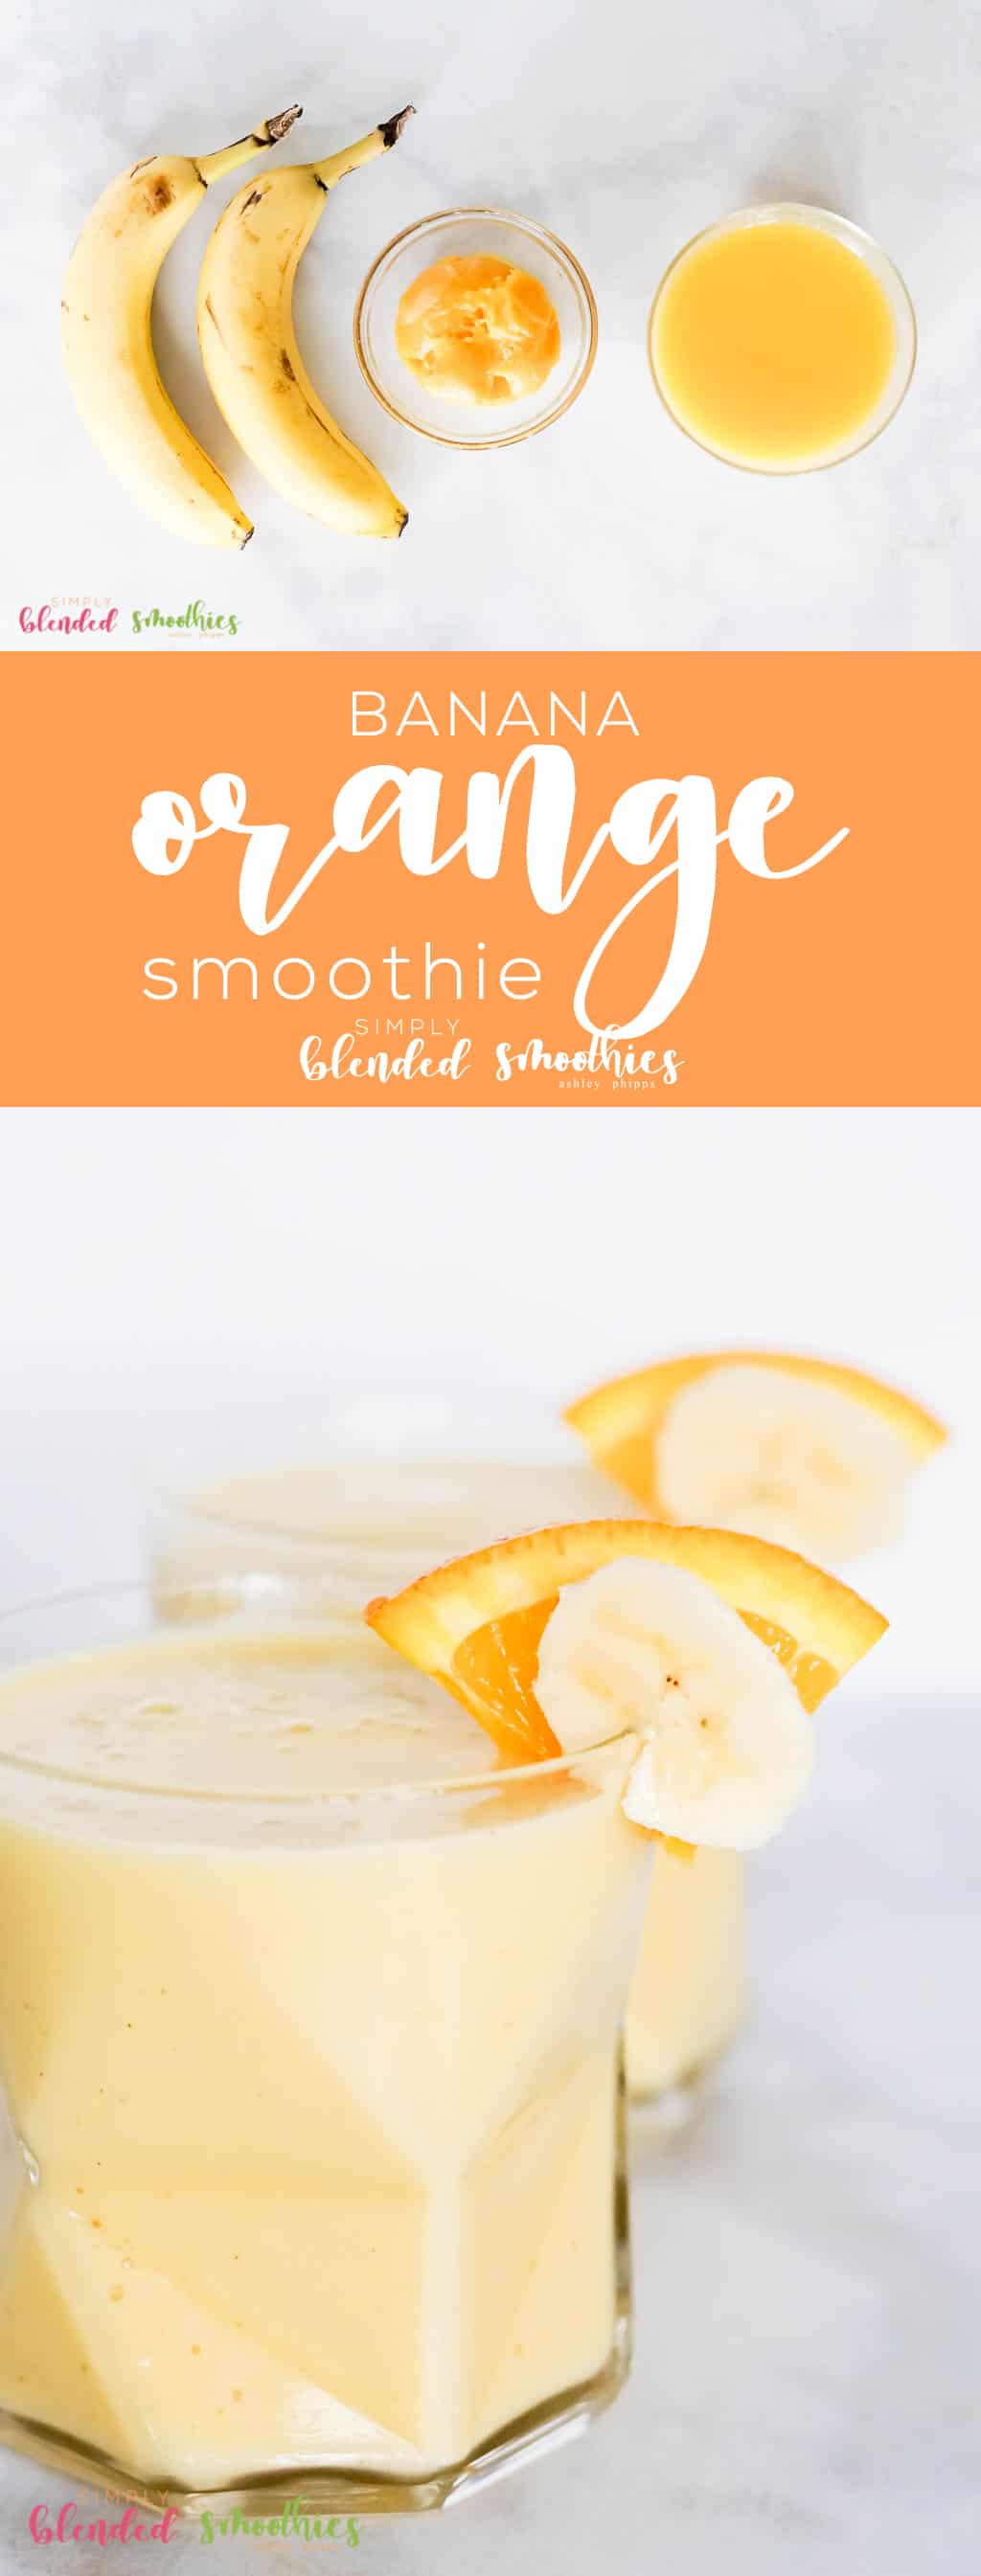 This Orange Banana Smoothie Recipe Is Made With Whole Ingredients And Is So Refreshing And Delicious - It Is Perfect For Breakfast Or Brunch Or A Snack Anytime